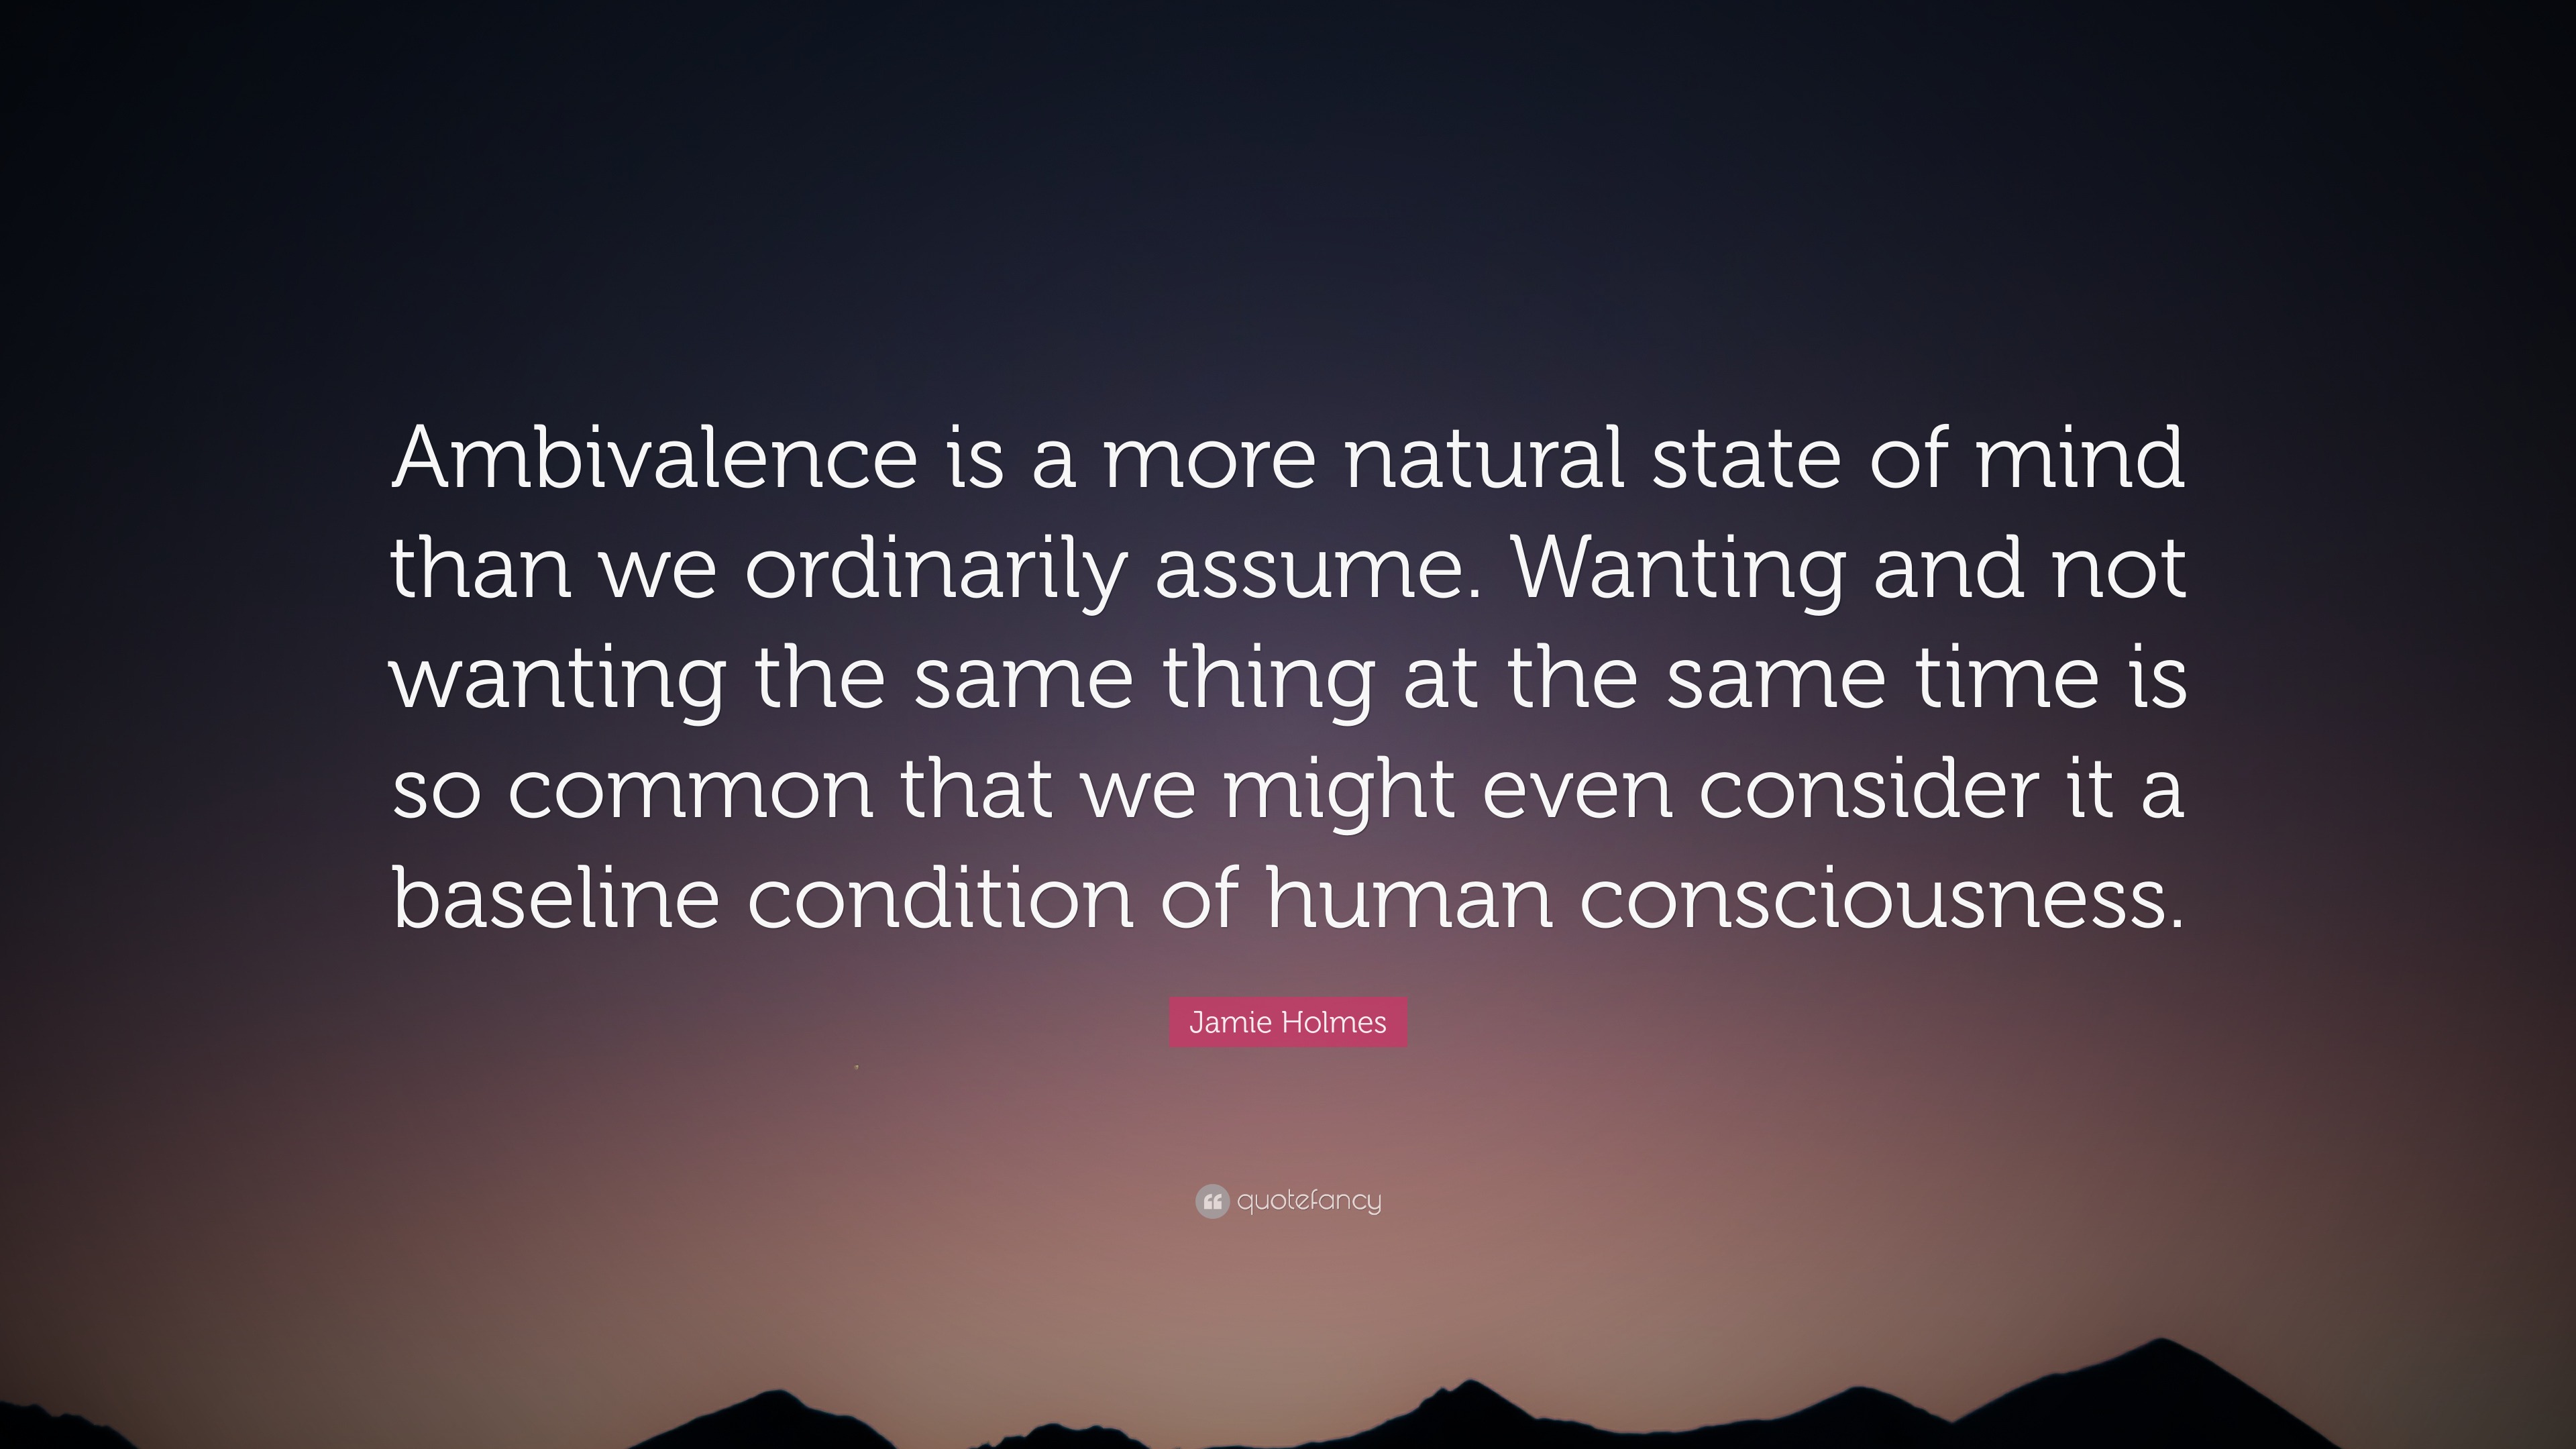 Jamie Holmes Quote: “Ambivalence is a more natural state of mind than ...